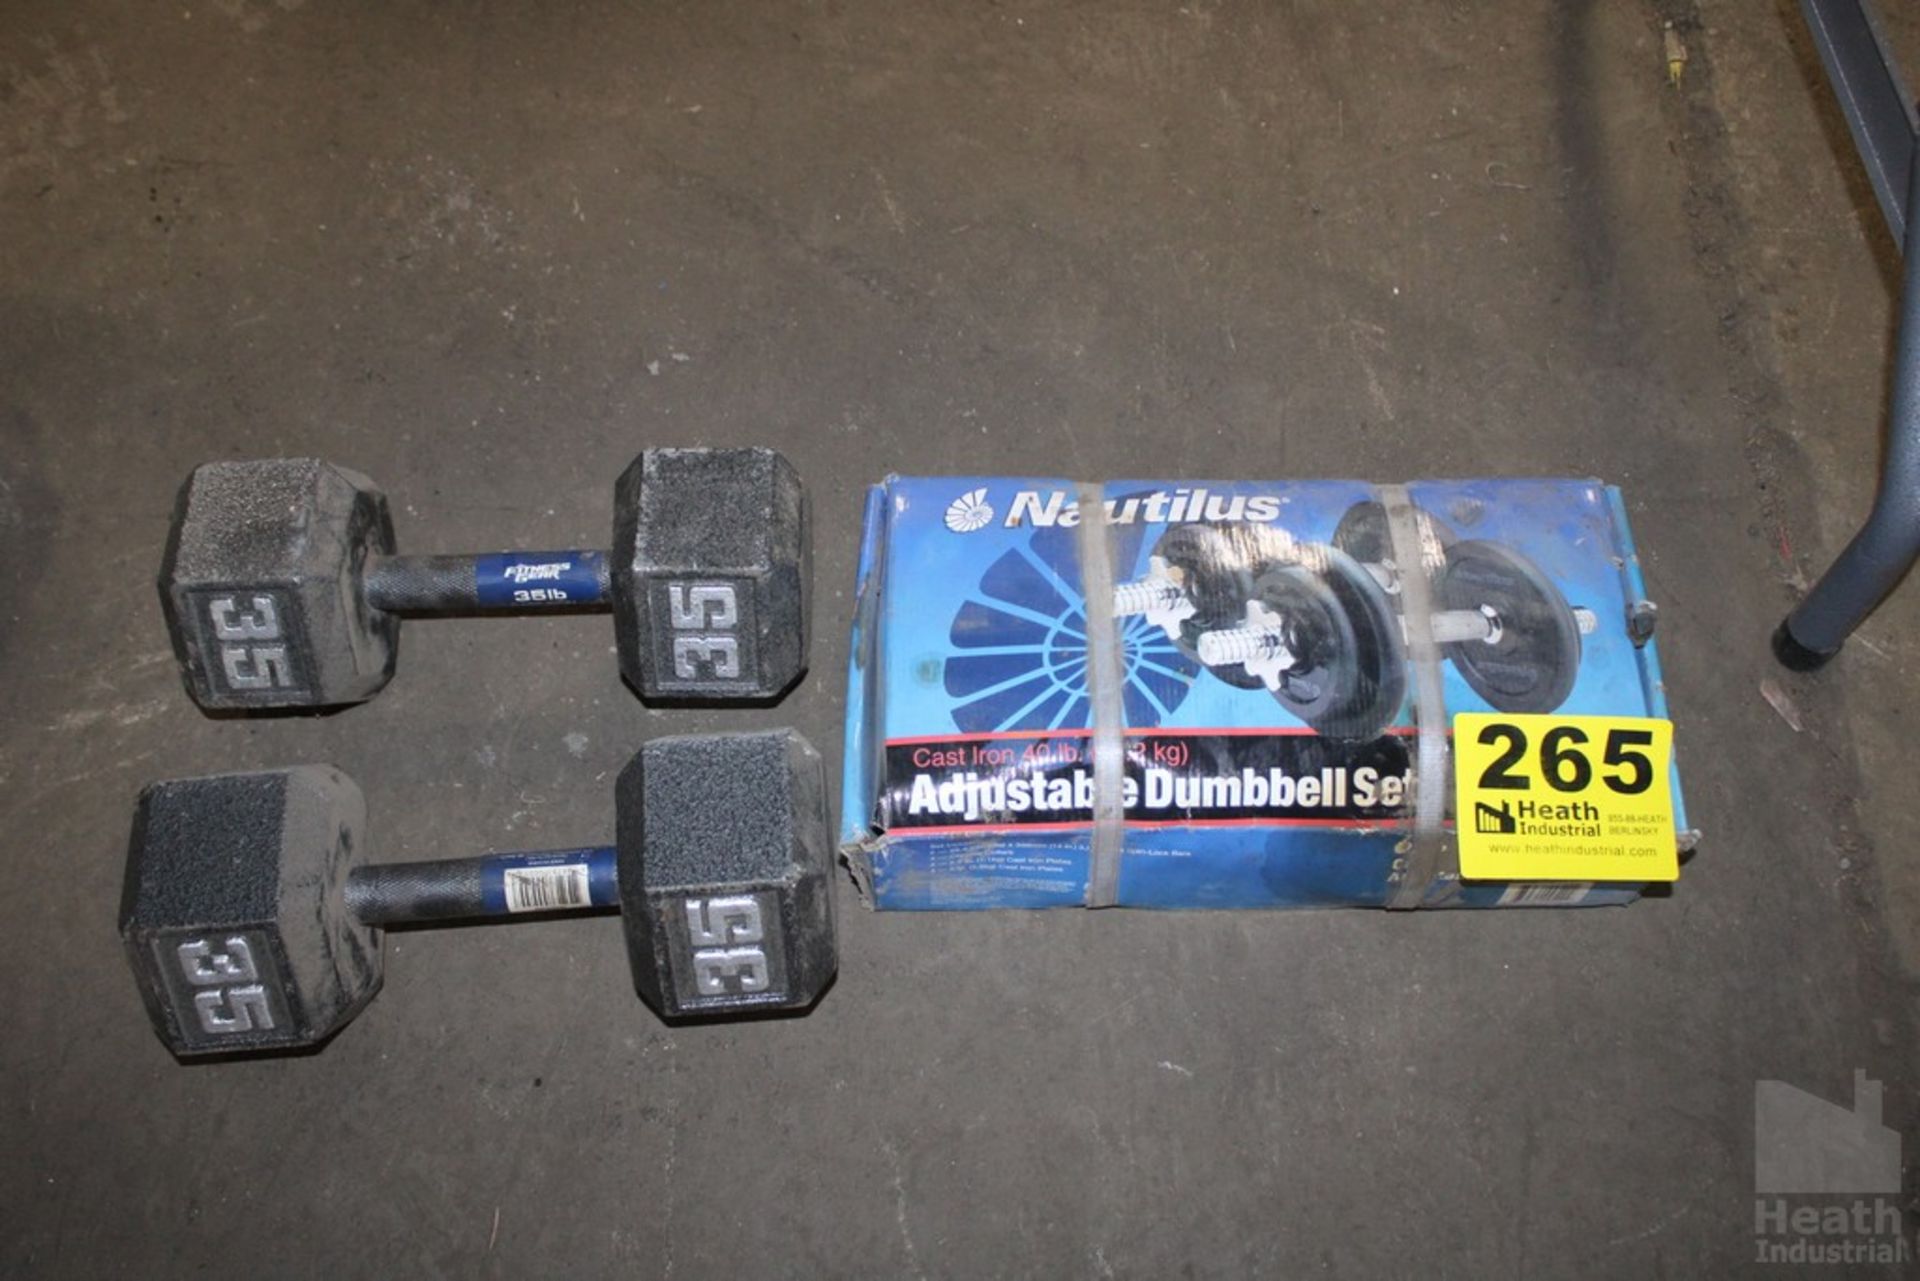 NAUTILUS 40 LB CAST IRON DUMBBELL SET WITH TWO DUMBBELLS (UNOPENED)